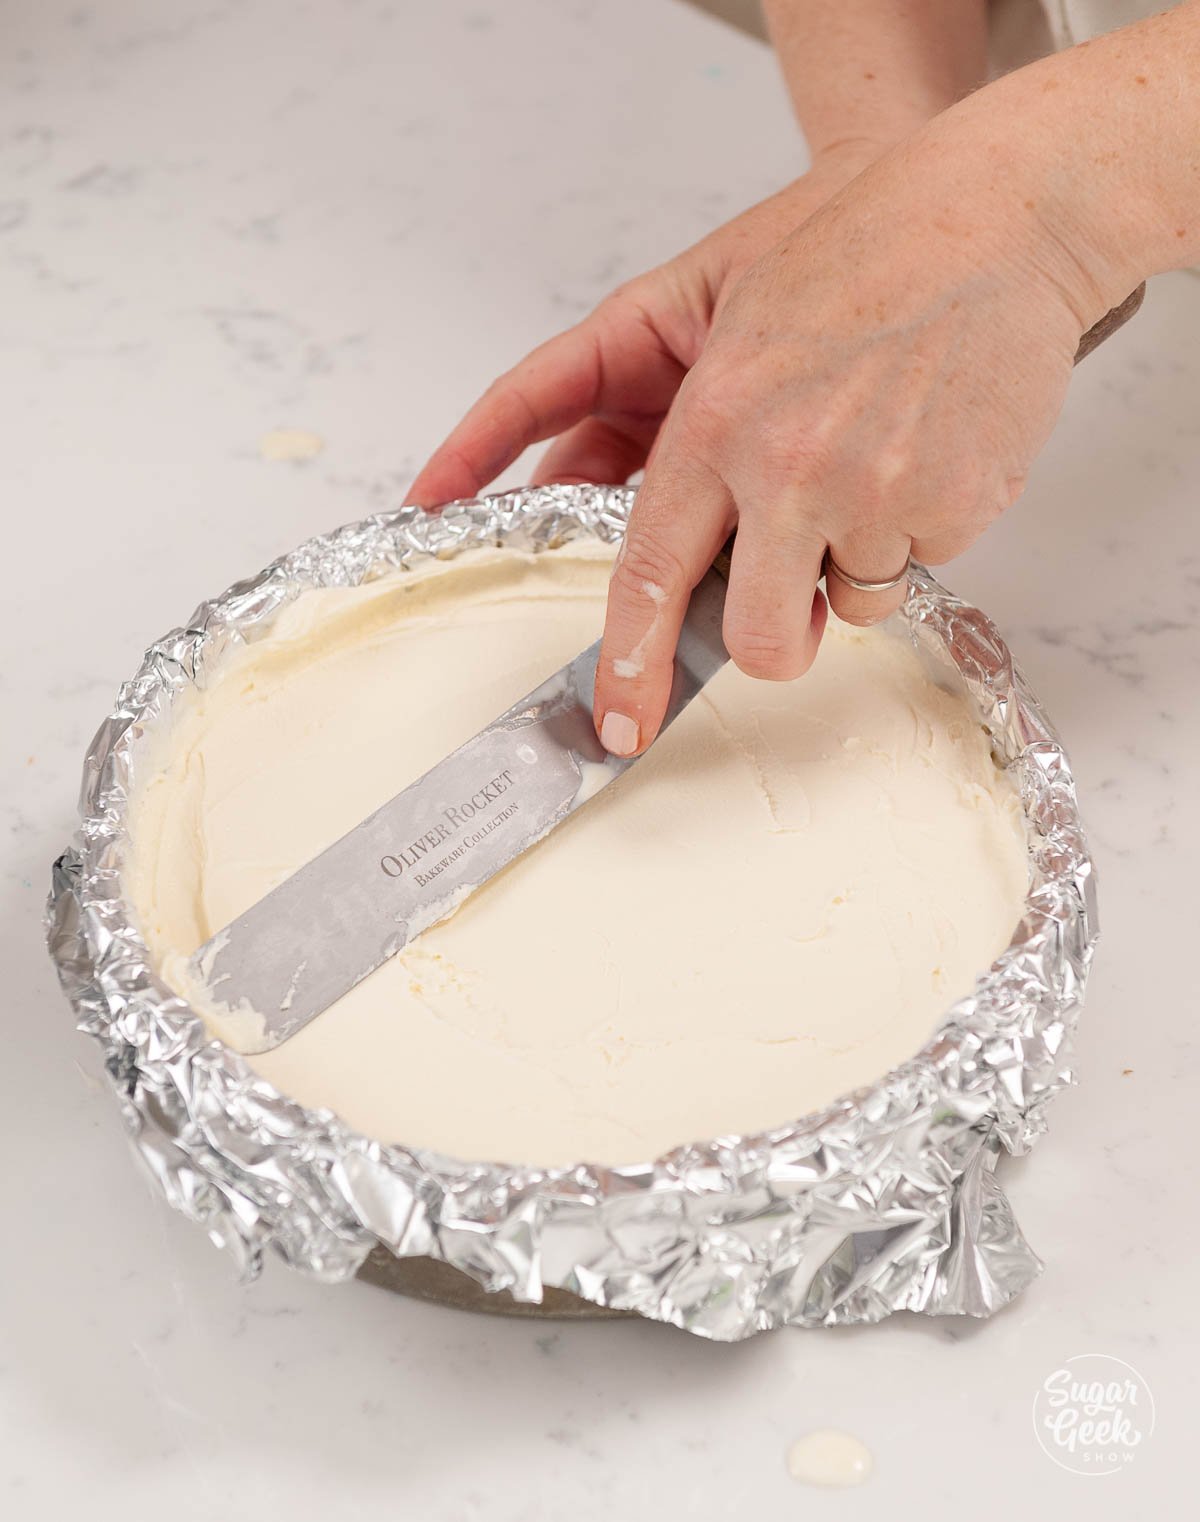 smoothing ice cream in an aluminum foil lined cake pan